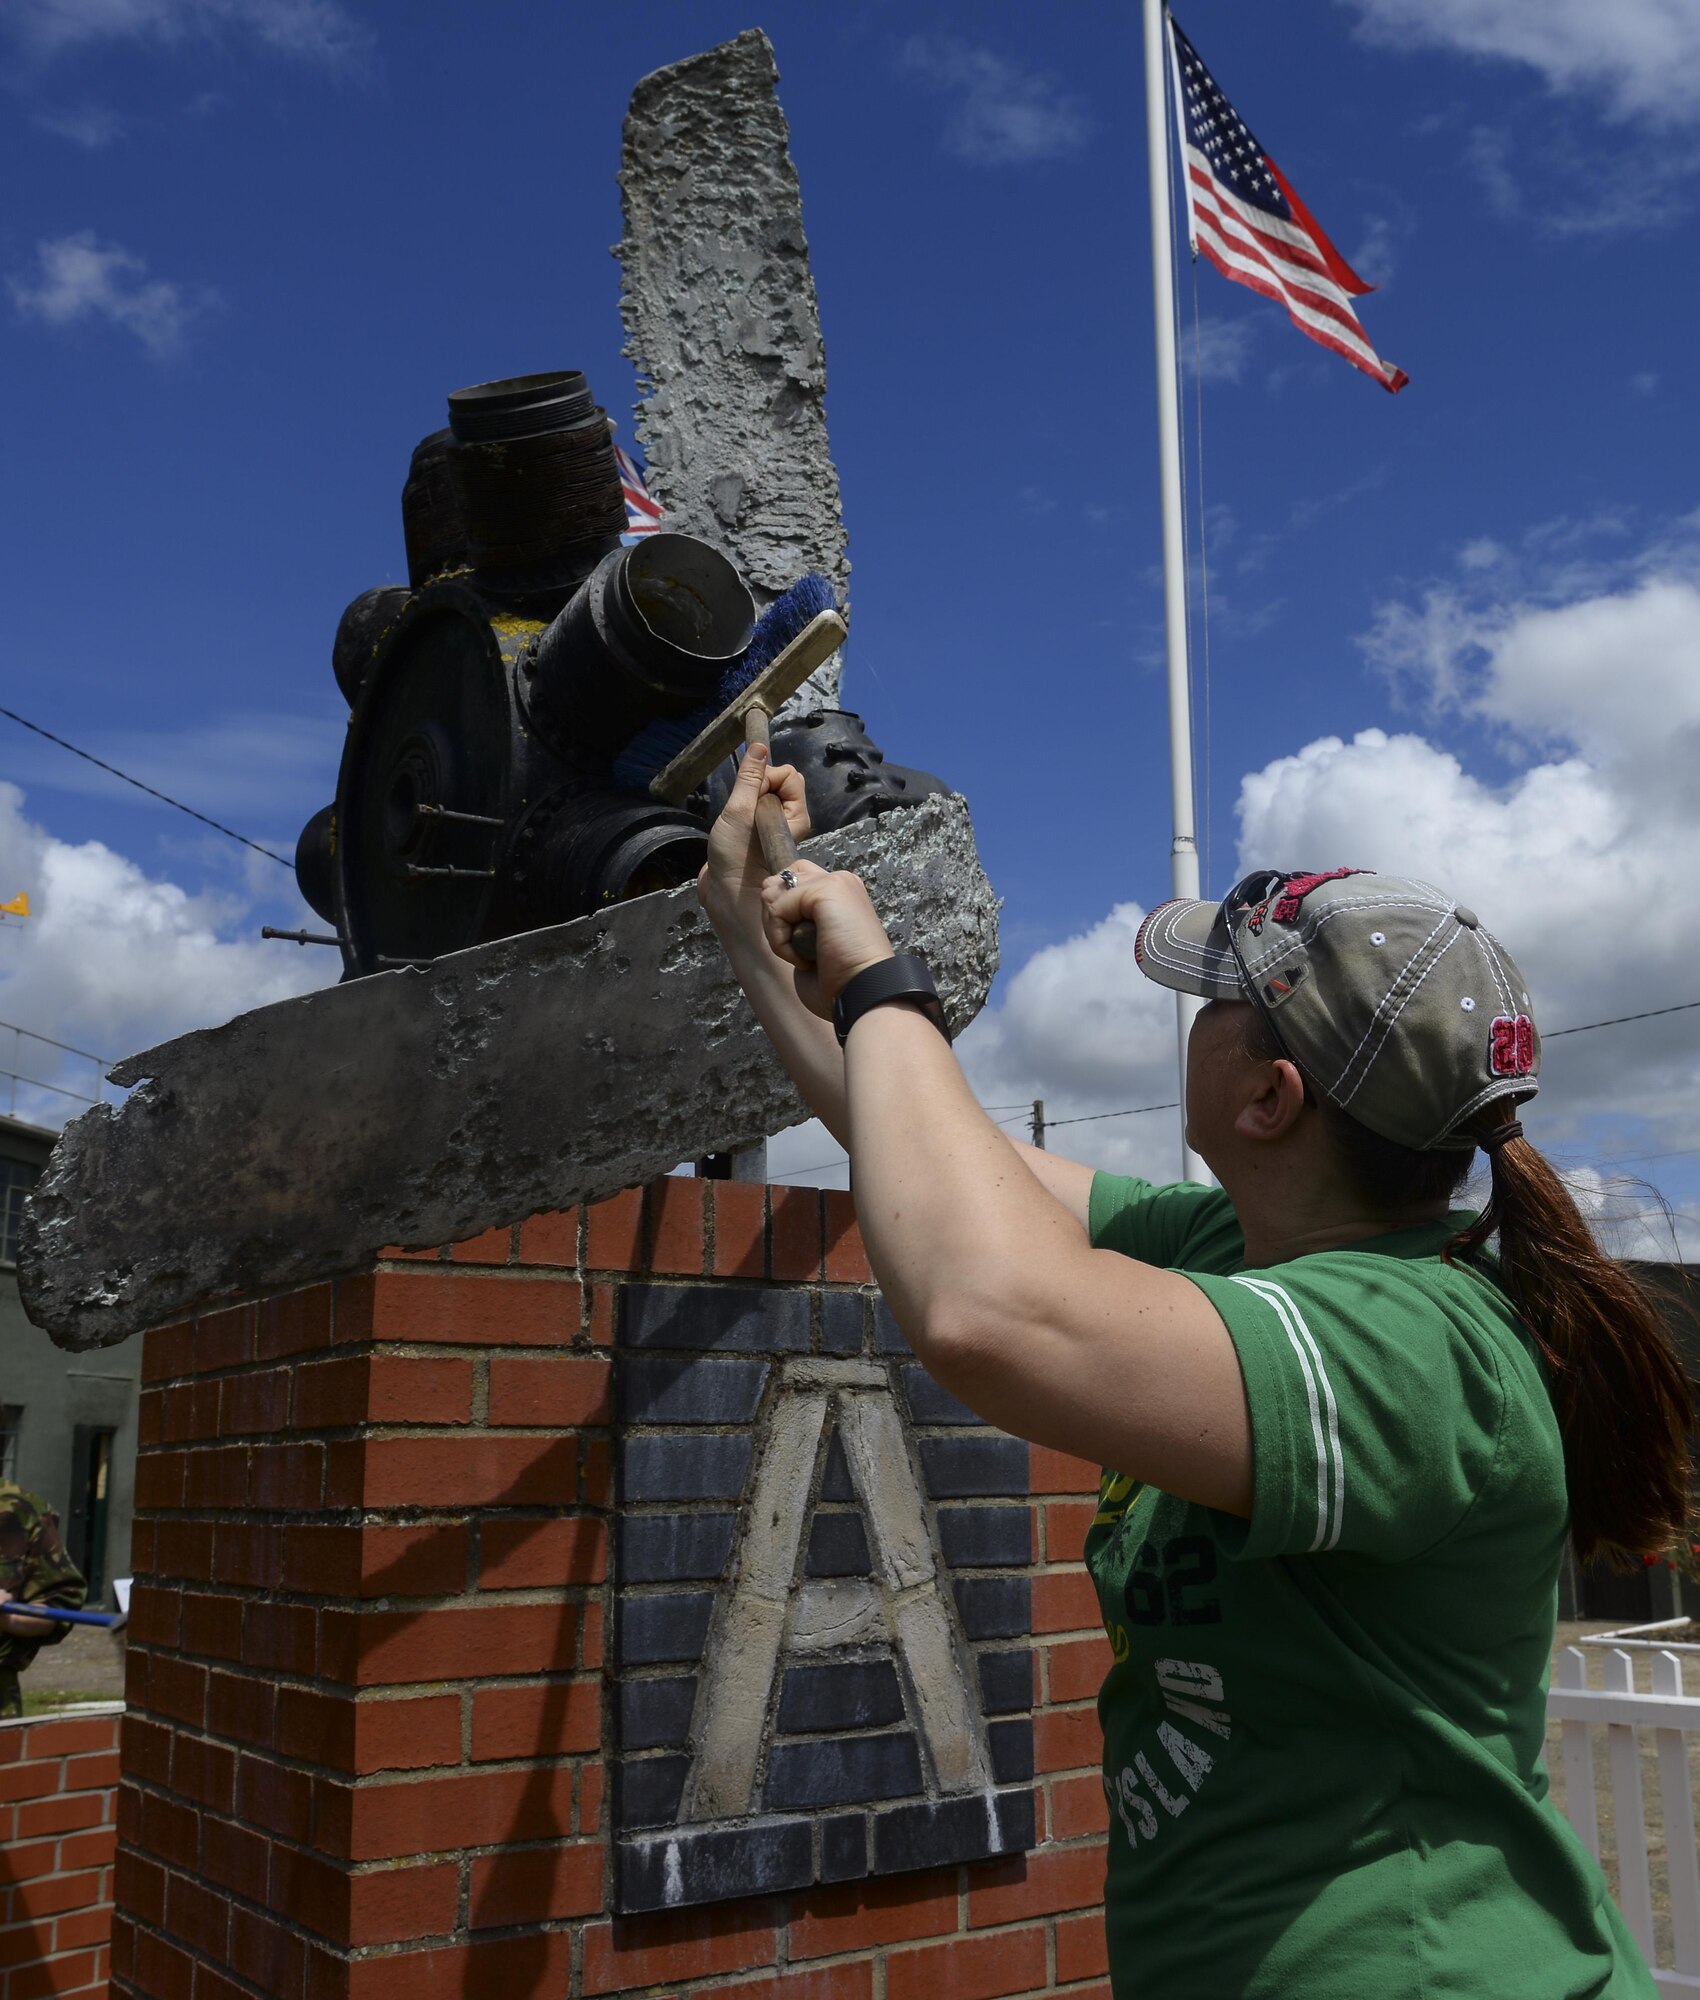 U.S. Air Force Tech. Sgt. Tracy Thorpe, 373rd Training Squadron KC-135 avionics instructor, cleans a monument on display July 17, 2016, at the RAF Rougham Tower Museum in Bury St. Edmunds, England.  Volunteers from the Air Force Sergeants' Association visited the museum to perform minor landscaping. (U.S. Air Force photo by Staff Sgt. Micaiah Anthony)